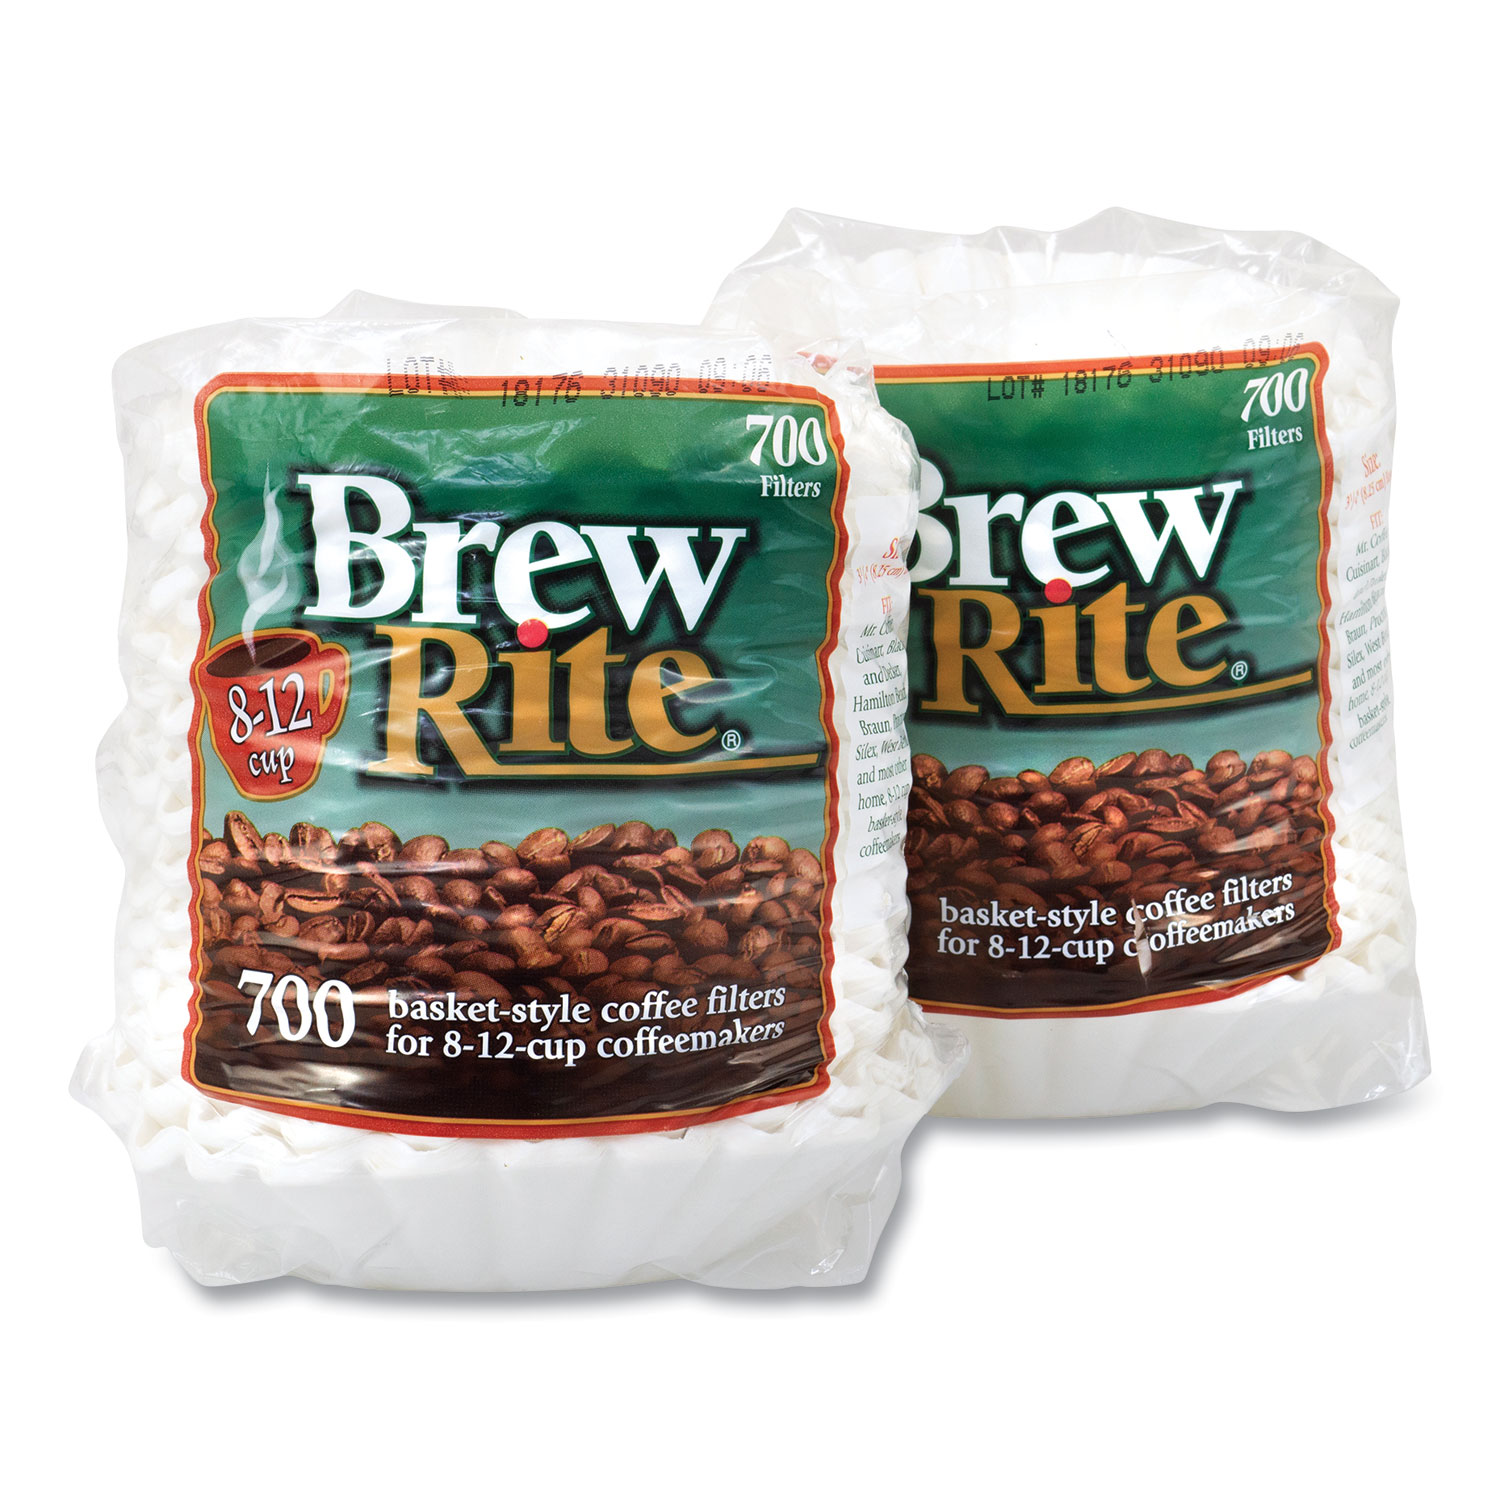  Brew Rite 02129 Basket Coffee Filters, 8-12 Cups, 700/Bag, 2 Bags/Pack, Free Delivery in 1-4 Business Days (GRR90000152) 